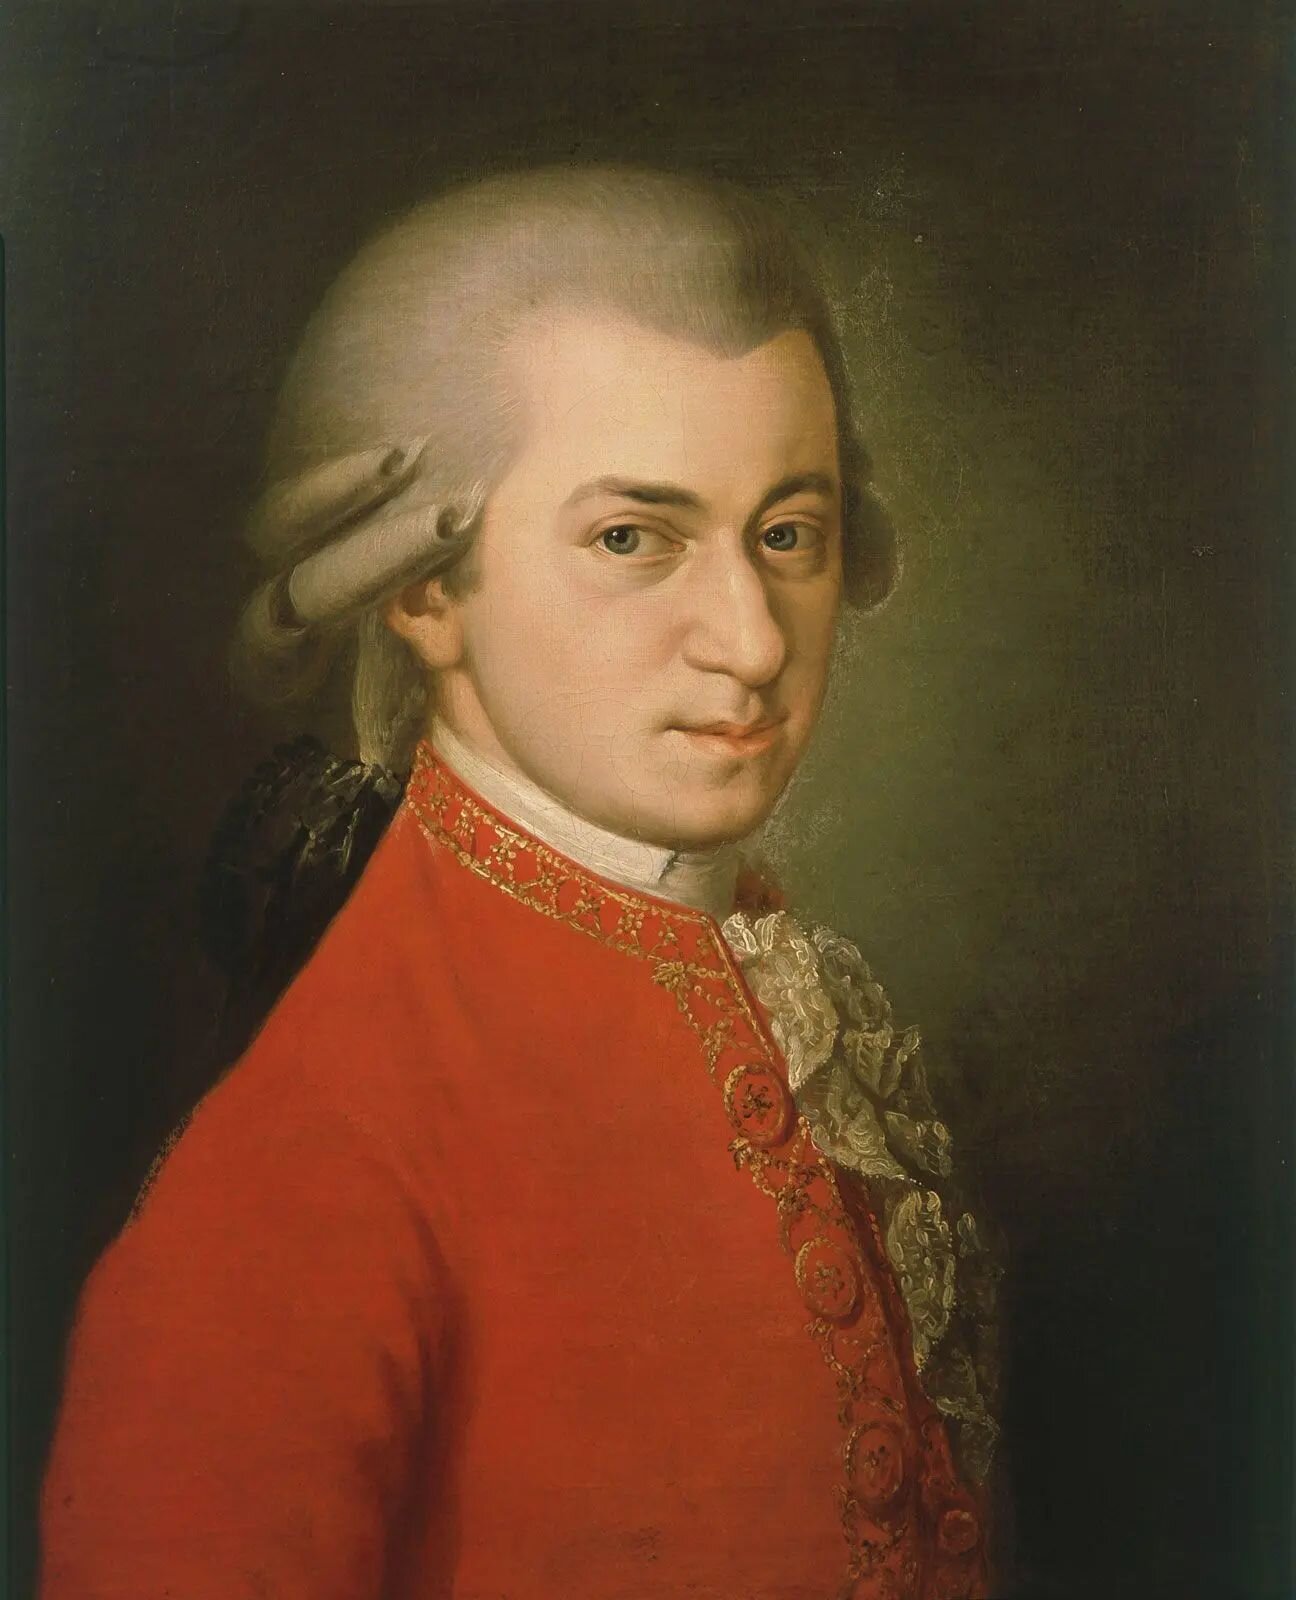 Happy Birthday to Wolfgang Amadeus Mozart, one of the most influential composers of all time, who was born on this day 265 years ago. 🎹❤
.
.
.
#mozart #amadeus #classicalmusic #composer #piano #music #history #classical #opera #violin #symphony #orc